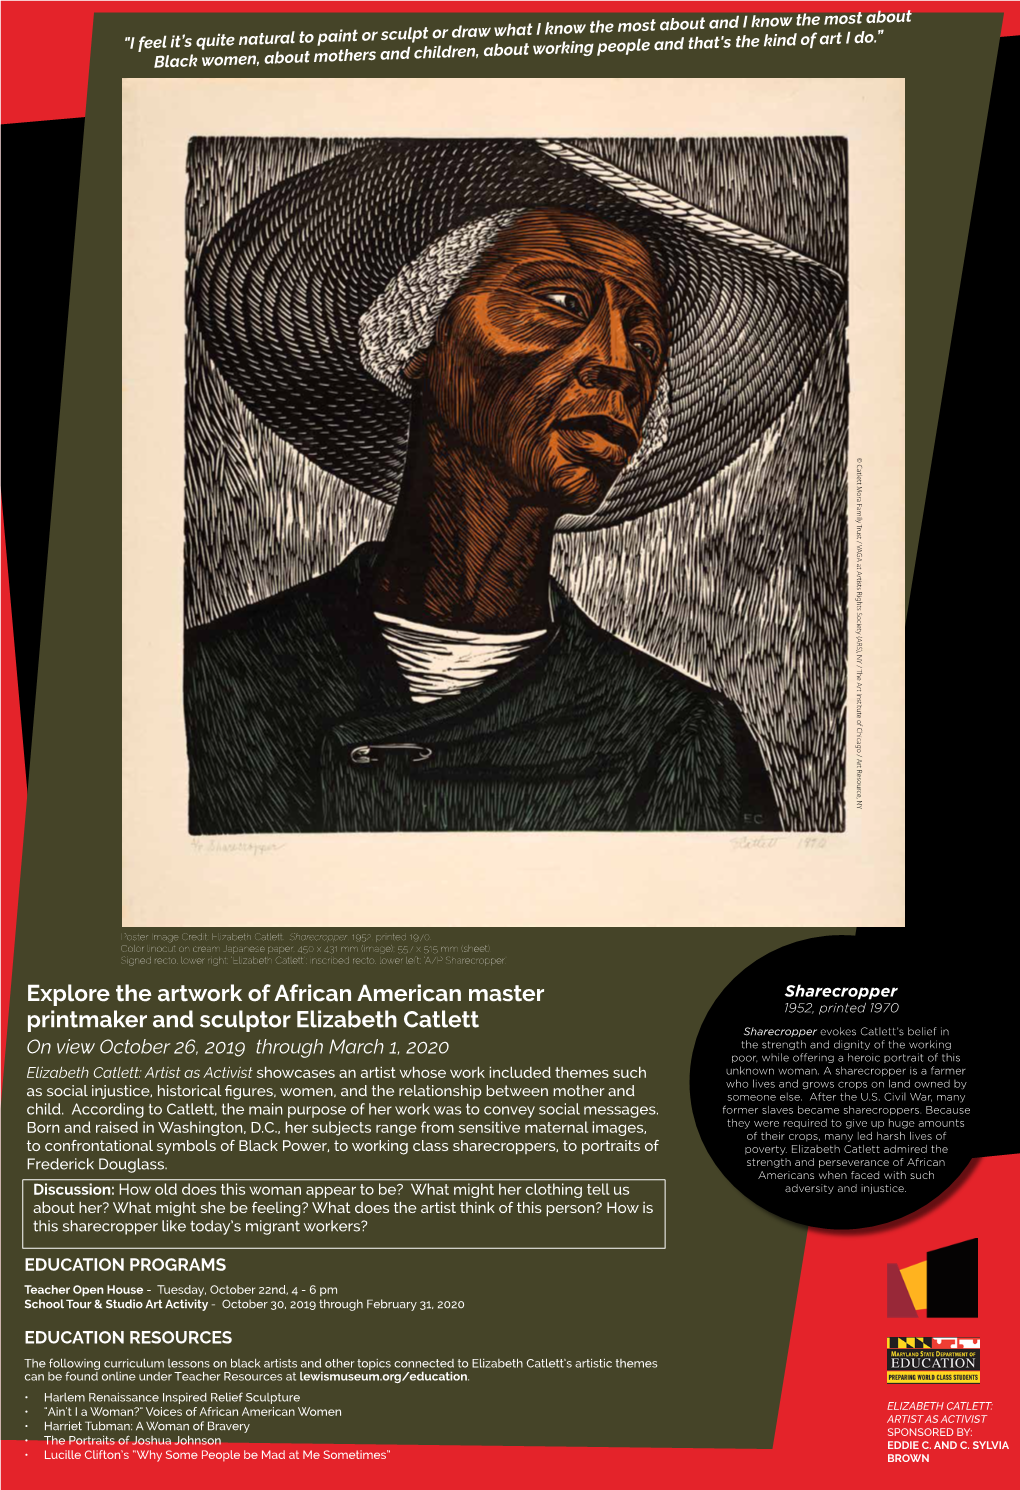 Explore the Artwork of African American Master Printmaker And